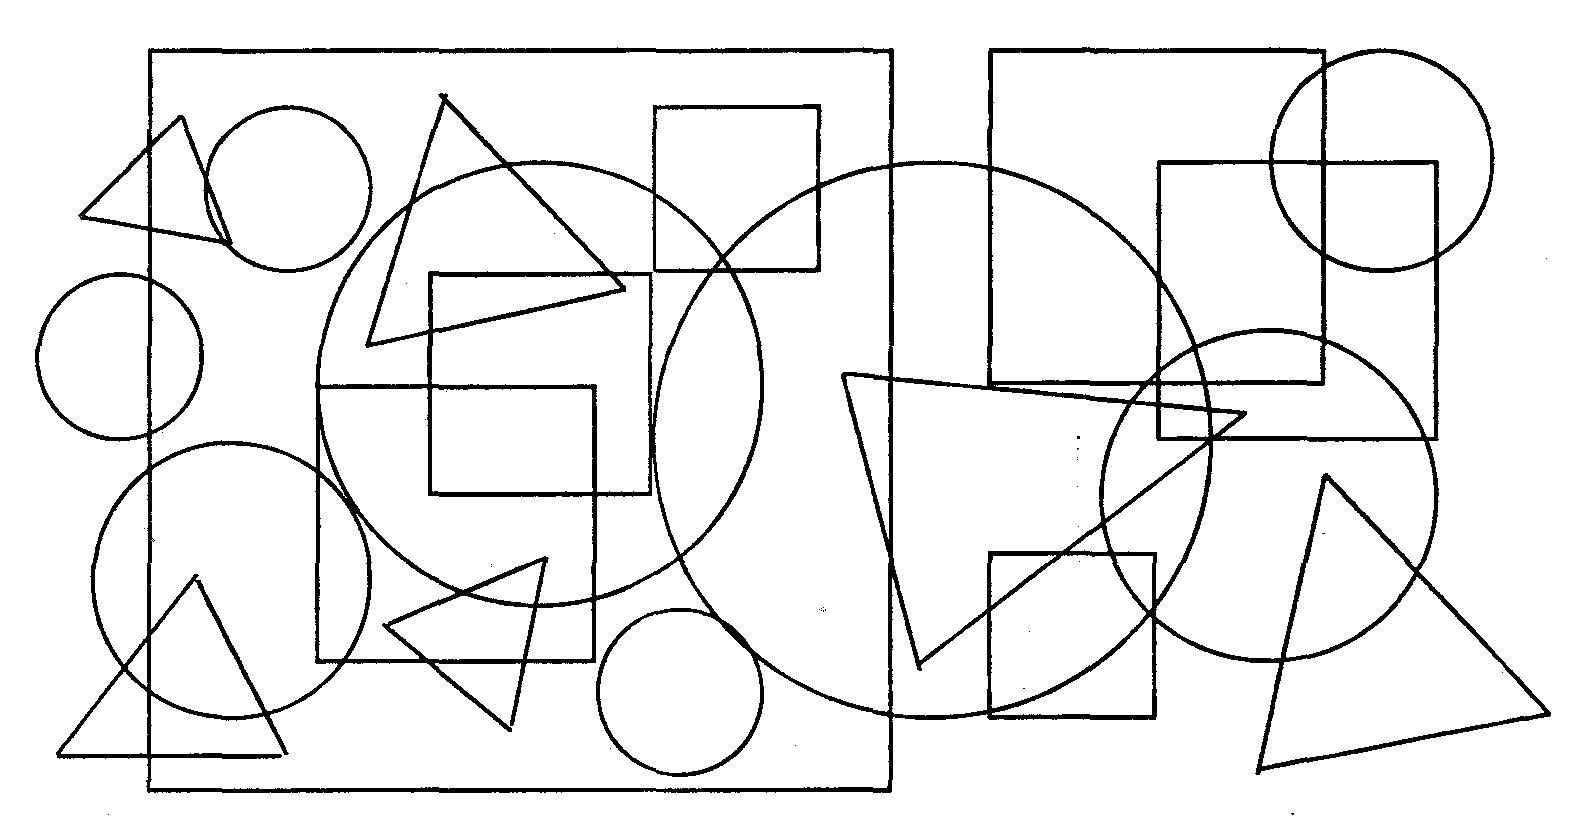 Coloring Geometric figure. Category mathematical coloring pages. Tags:  Mathematics, shapes.